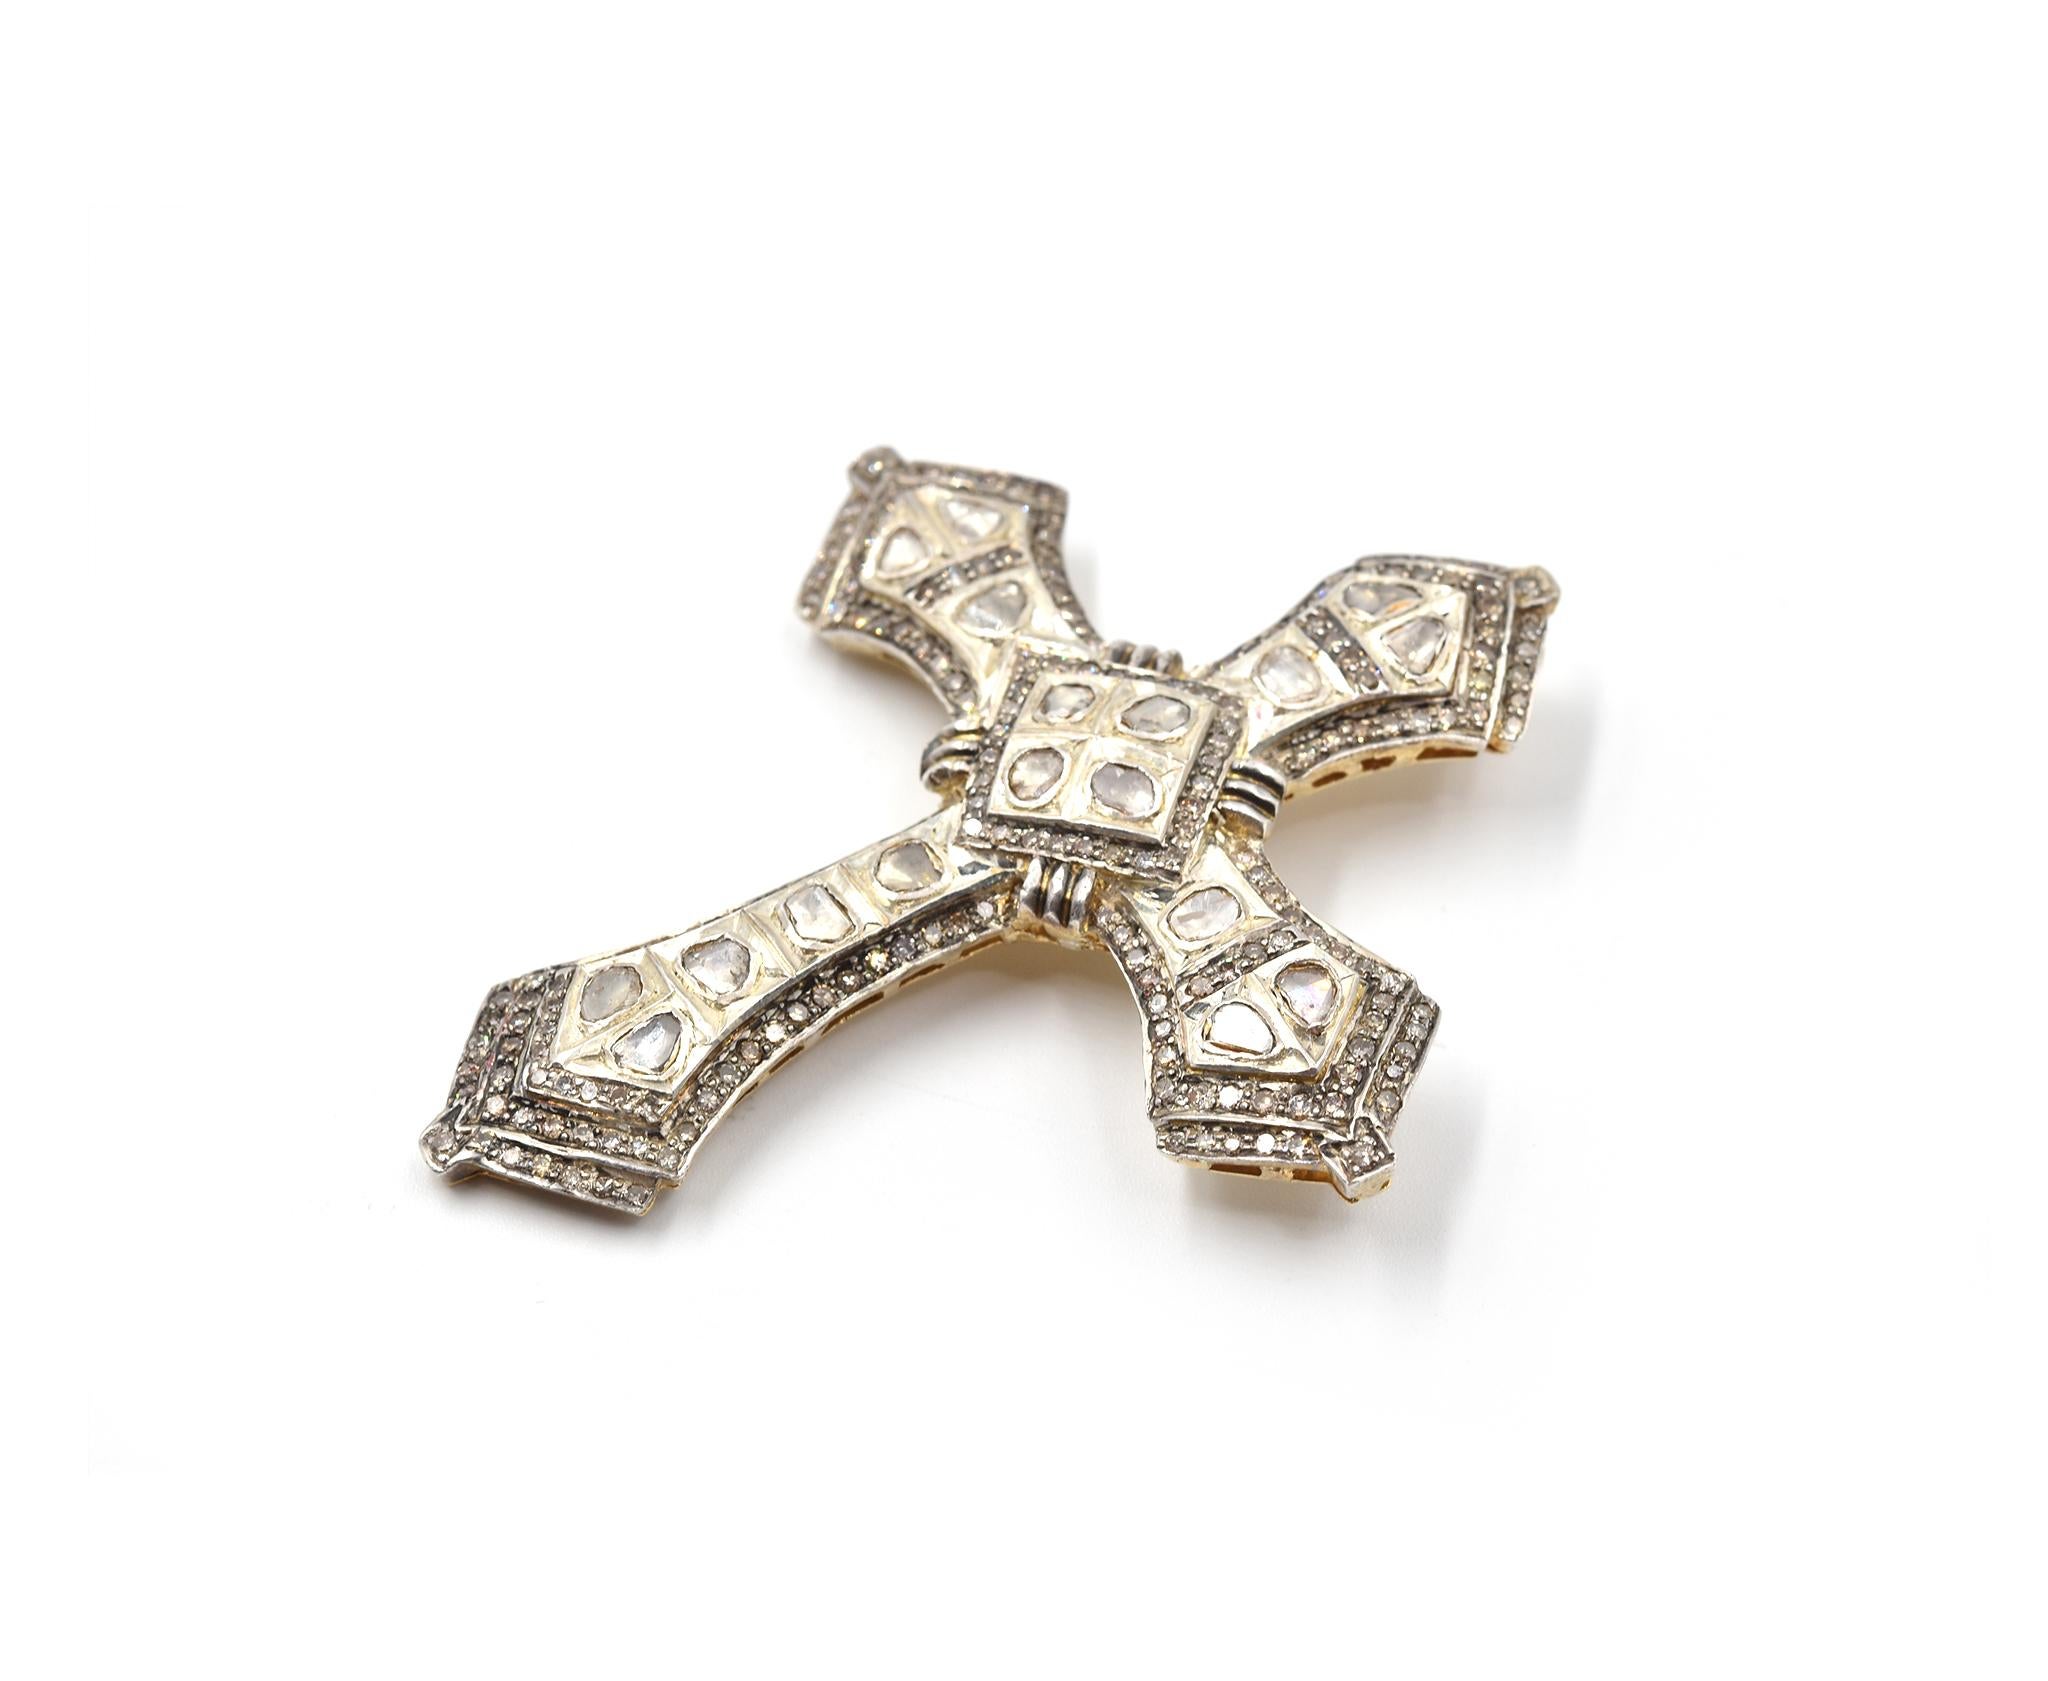 Designer: custom design
Material: silver/gold plated on the back of cross 
Diamonds: 208 rose cut diamonds = 3.90cttw
Color: G/H
Clarity: SI
Dimensions: pendant is 2.60-inch long and 2.21-inch wide
Weight: 21.34 grams
